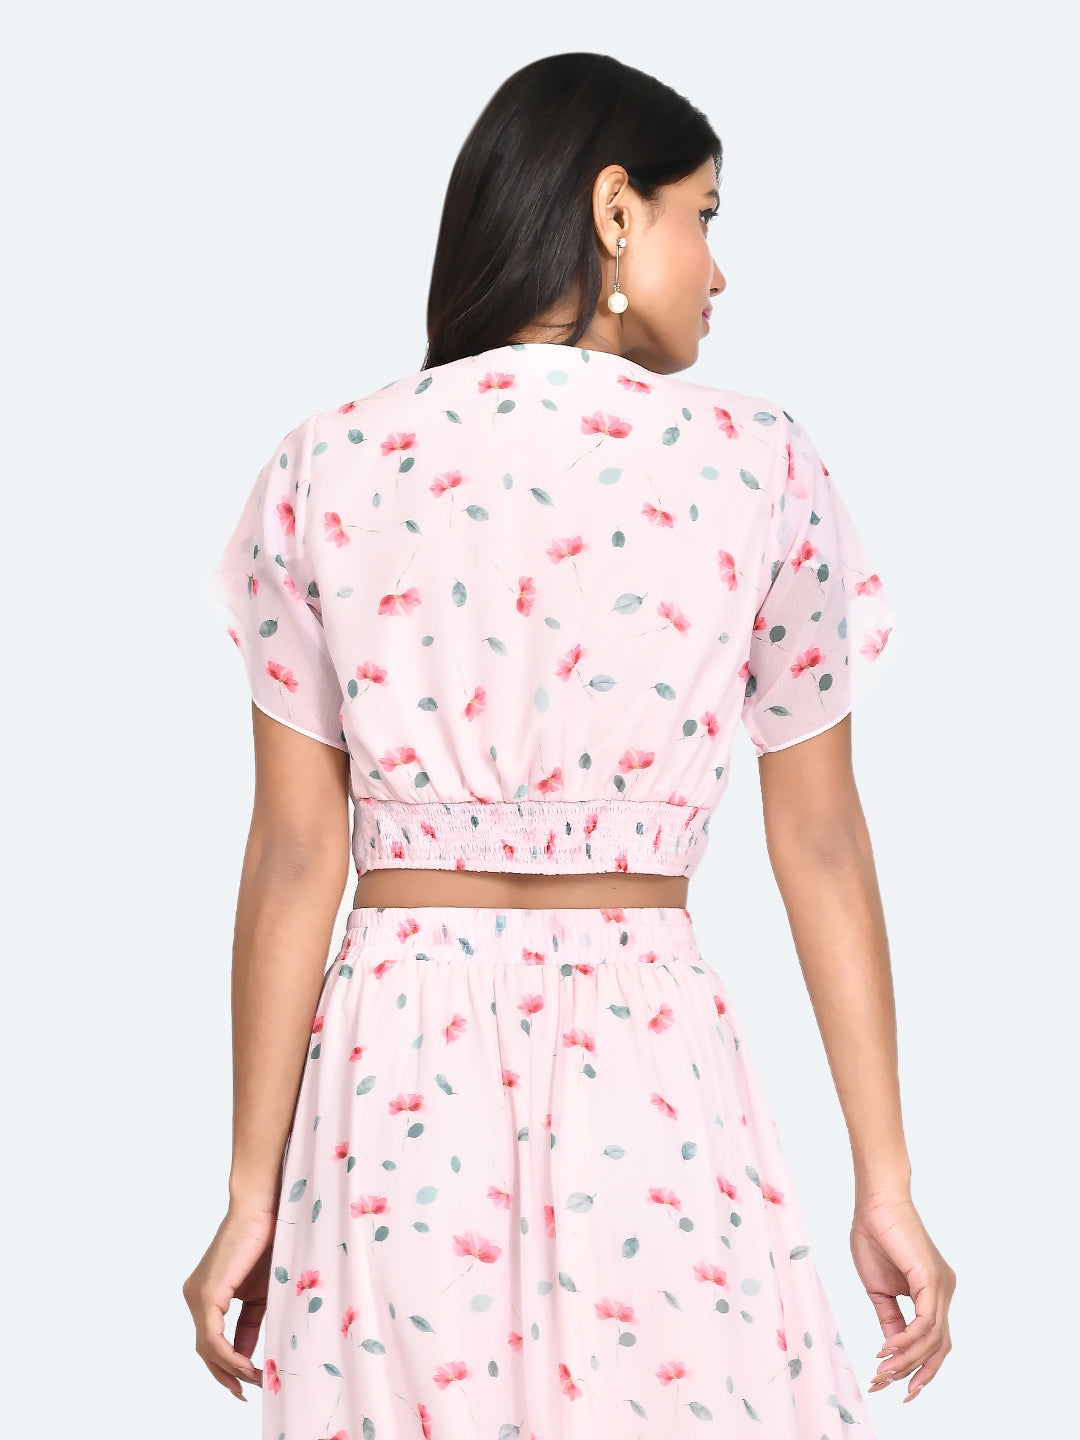 Pink Floral Print Tie-Up Top For Women